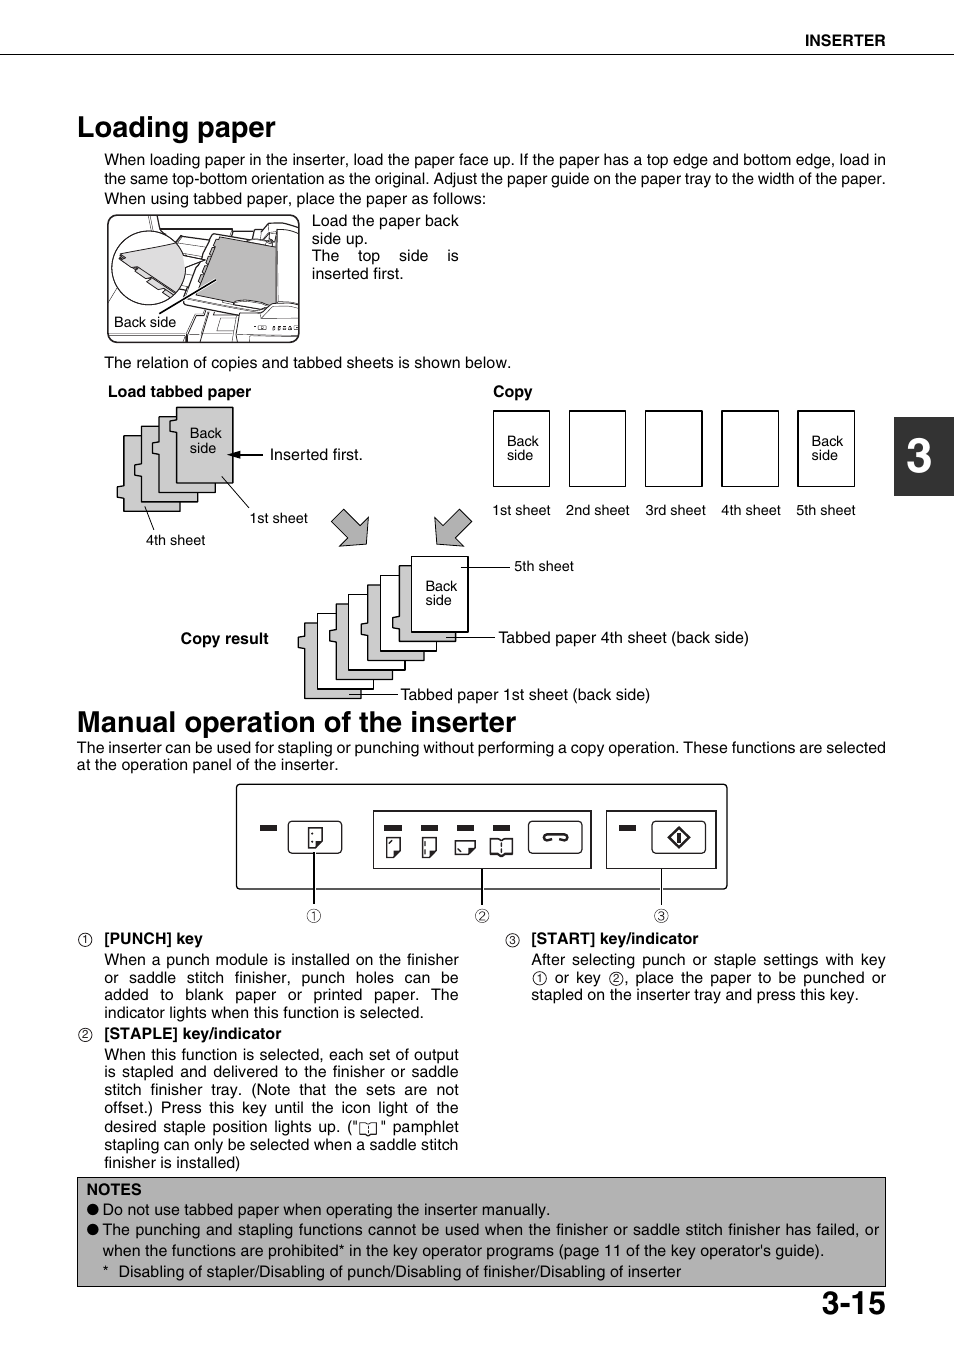 Loading paper, Manual operation of the inserter, Ge 3-15) | Sharp AR-M700N User Manual | Page 71 / 172